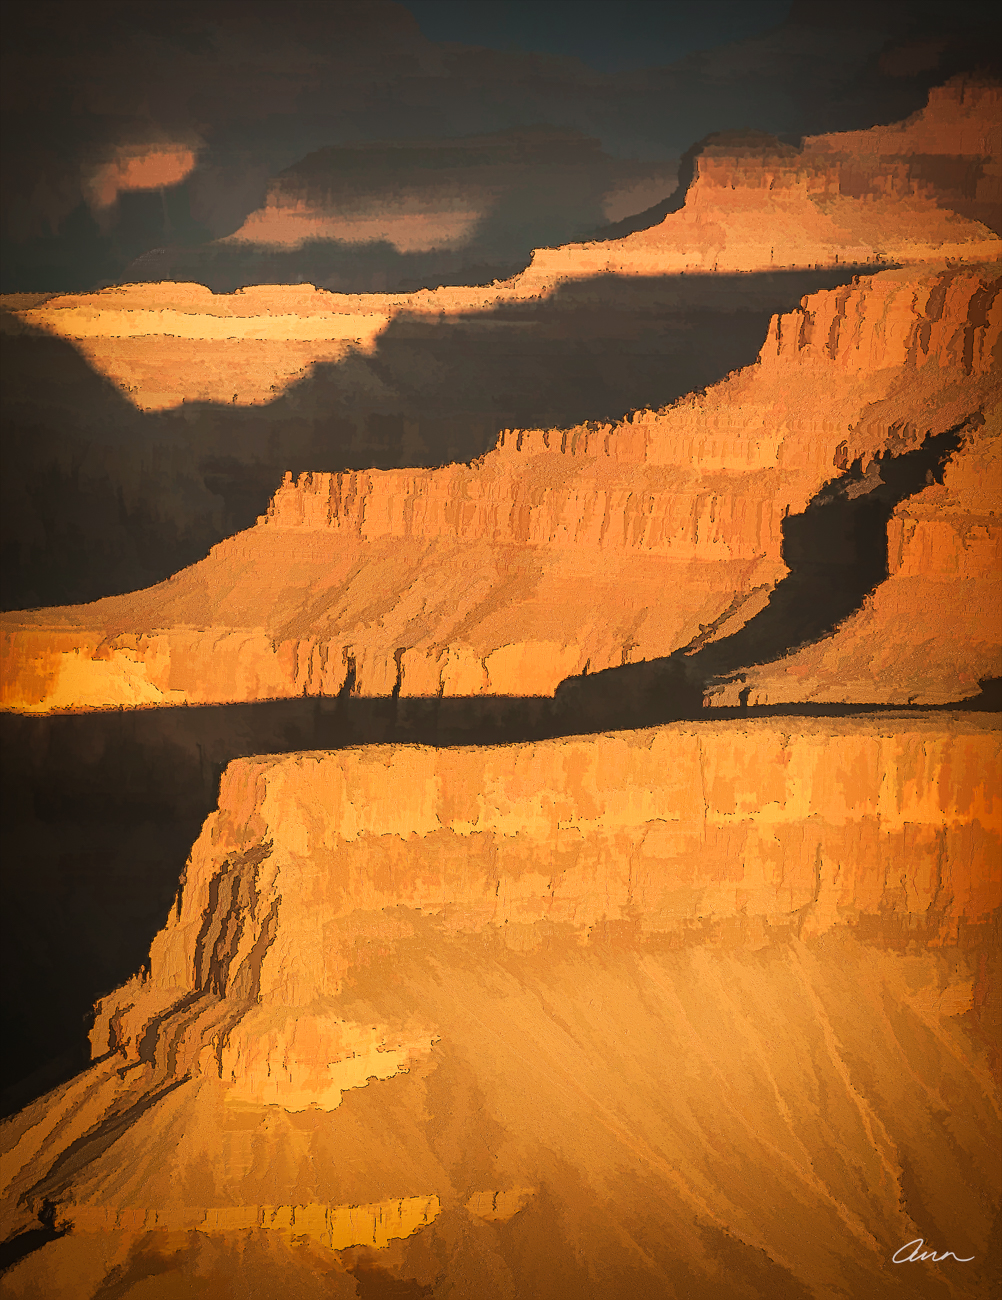 The Grand Canyon layers continue to evolve from solid fortress walls to grains of fine sand. Change takes time. Reinforce your...